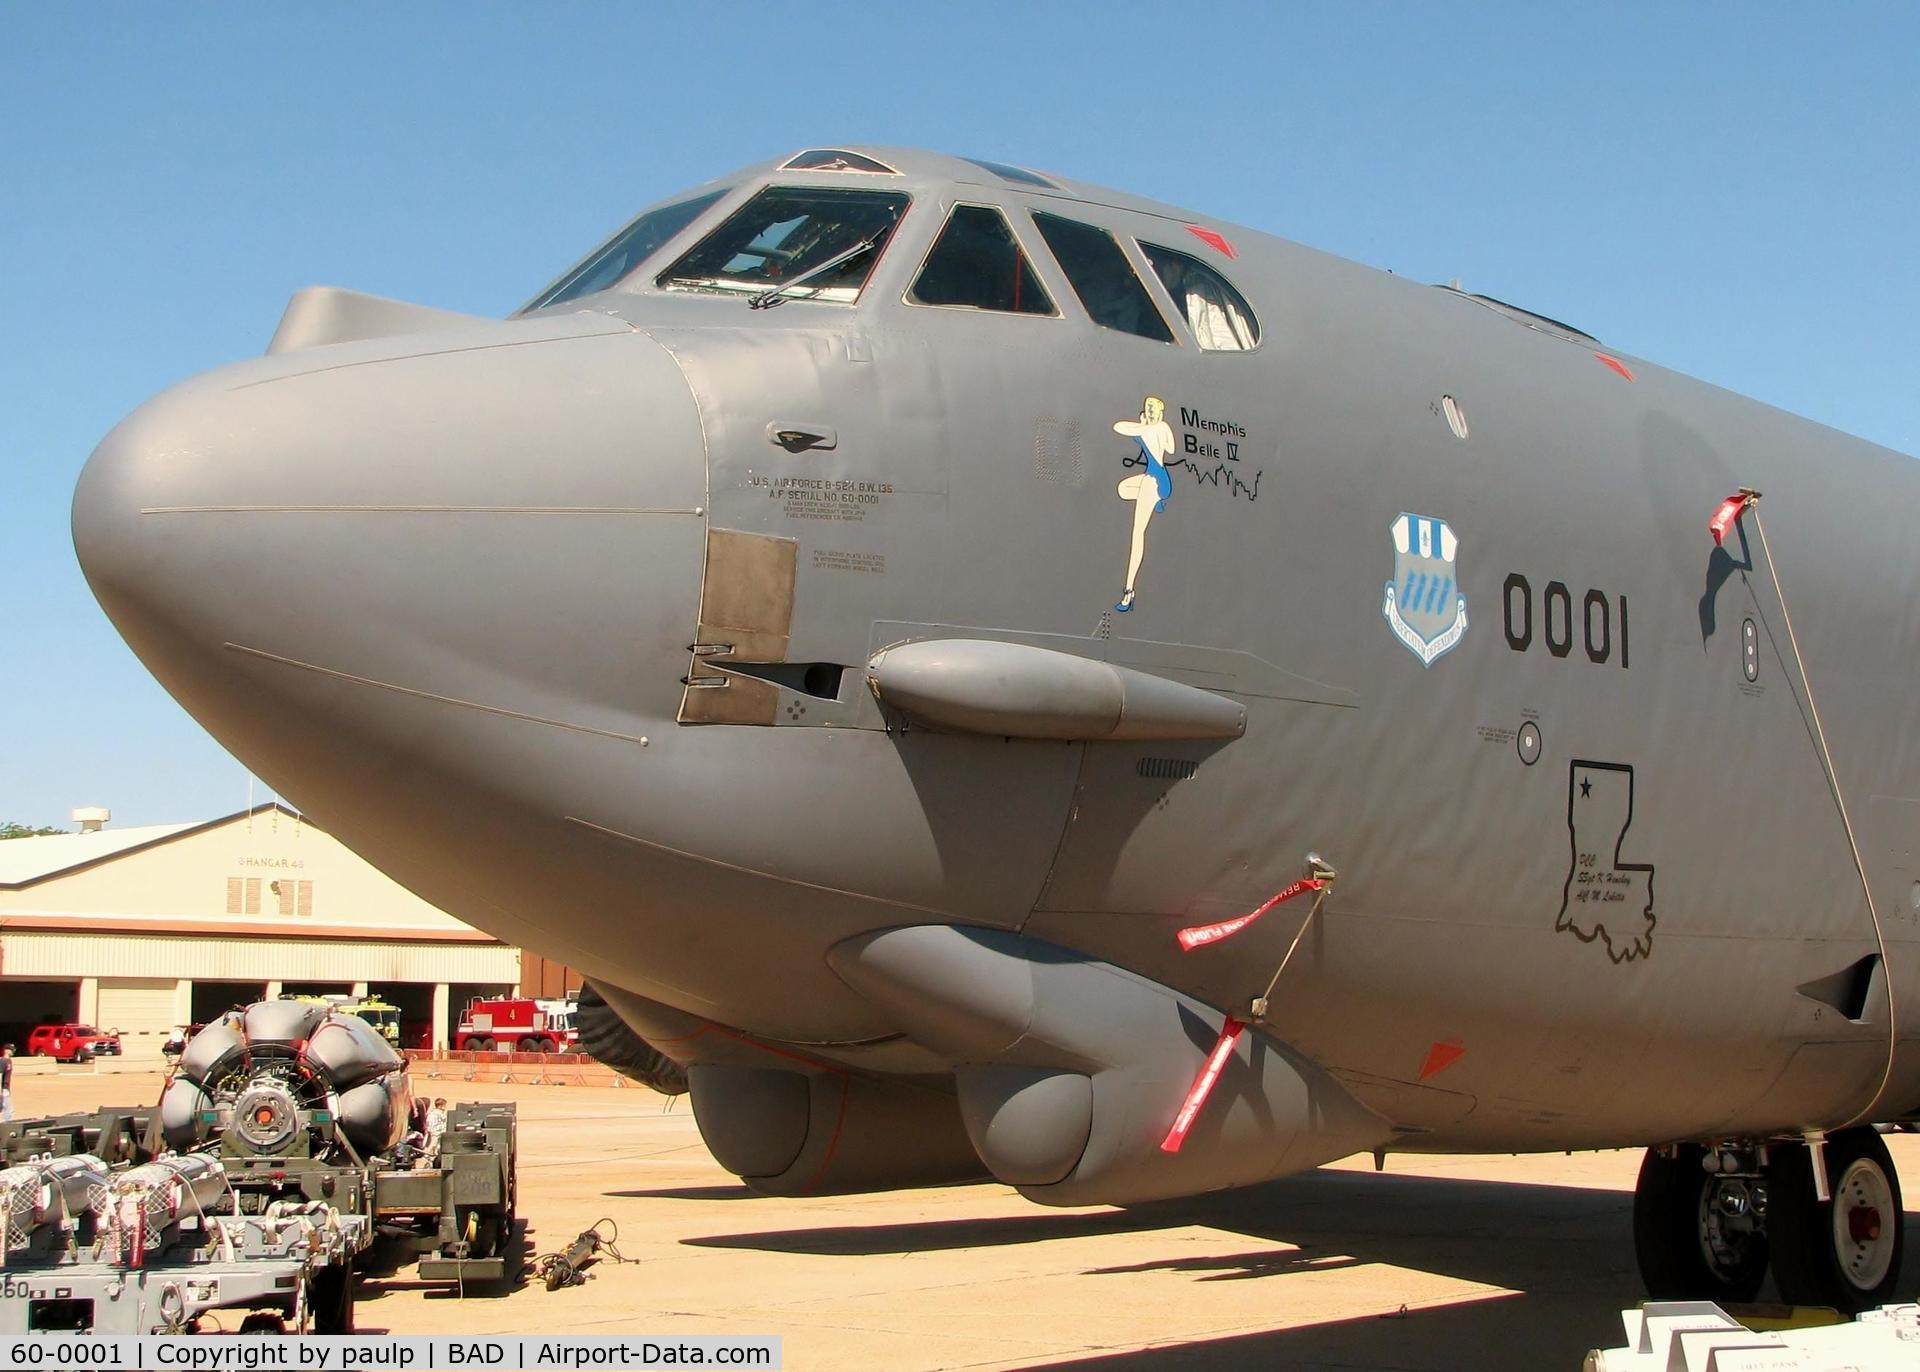 60-0001, 1960 Boeing B-52H Stratofortress C/N 464366, At Barksdale Air Force Base.